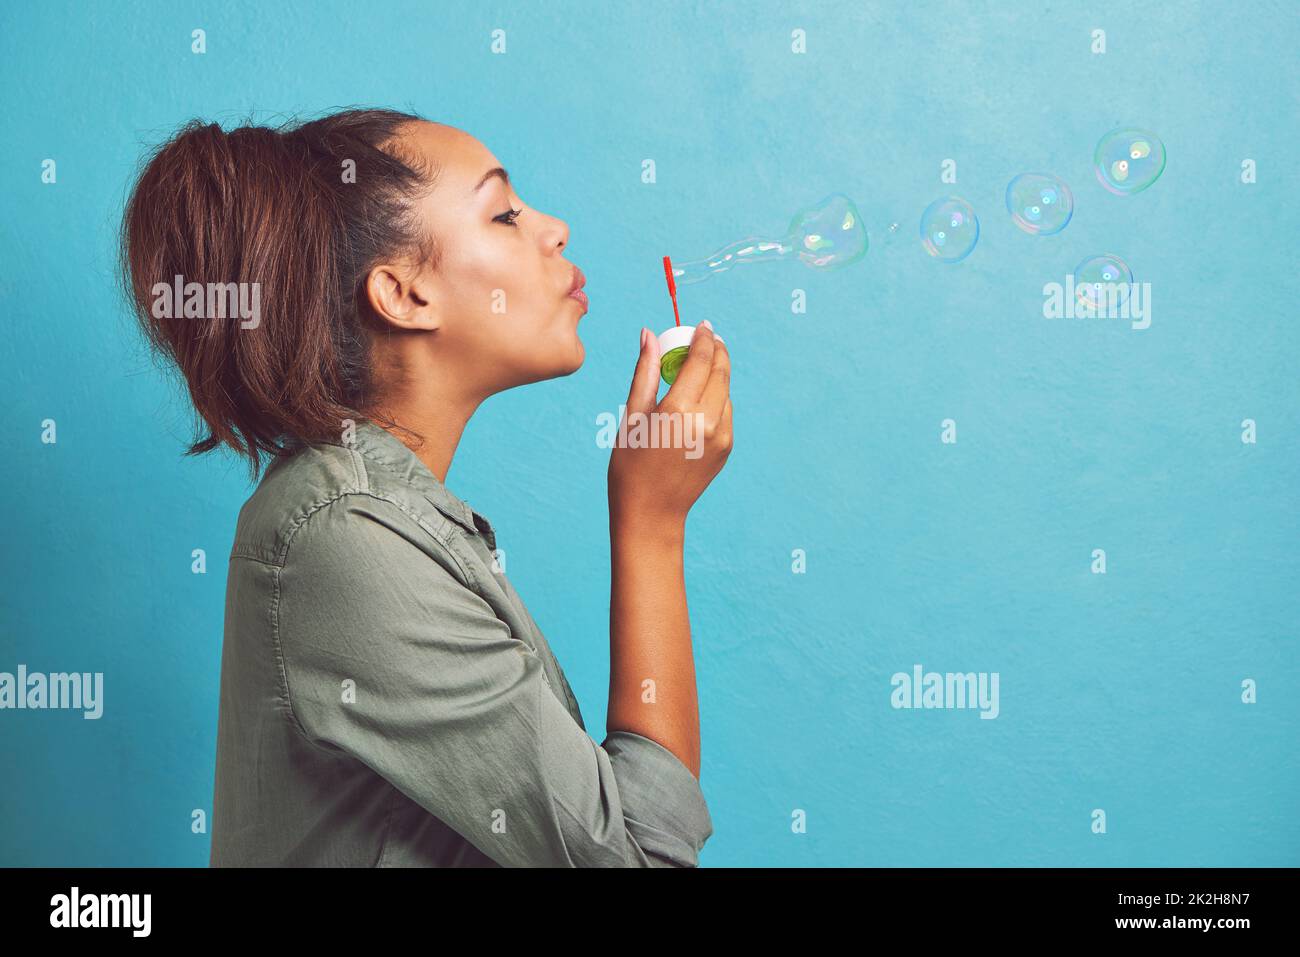 Keep calm and blow bubbles. Cropped shot of a young woman blowing bubbles against a blue background. Stock Photo